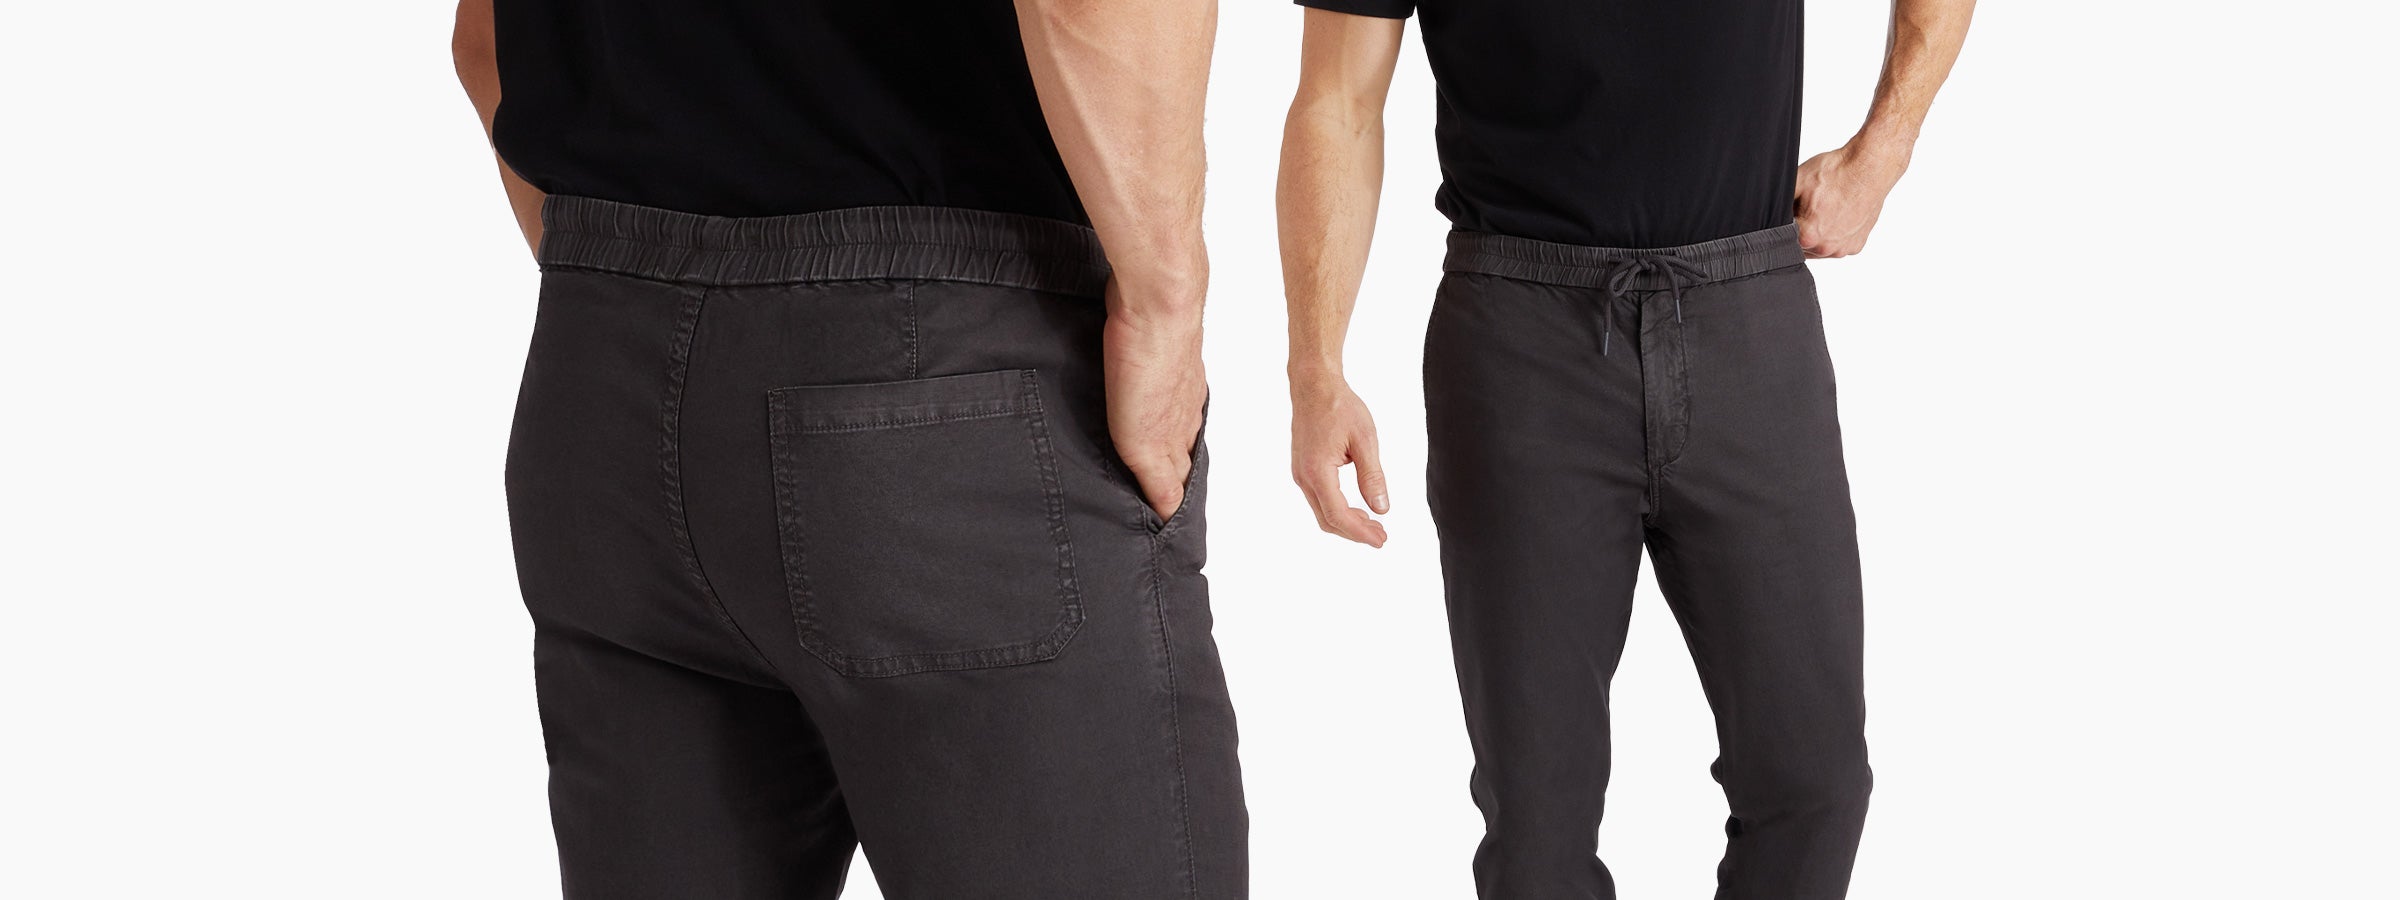 Mott and Bow men's pants review. 